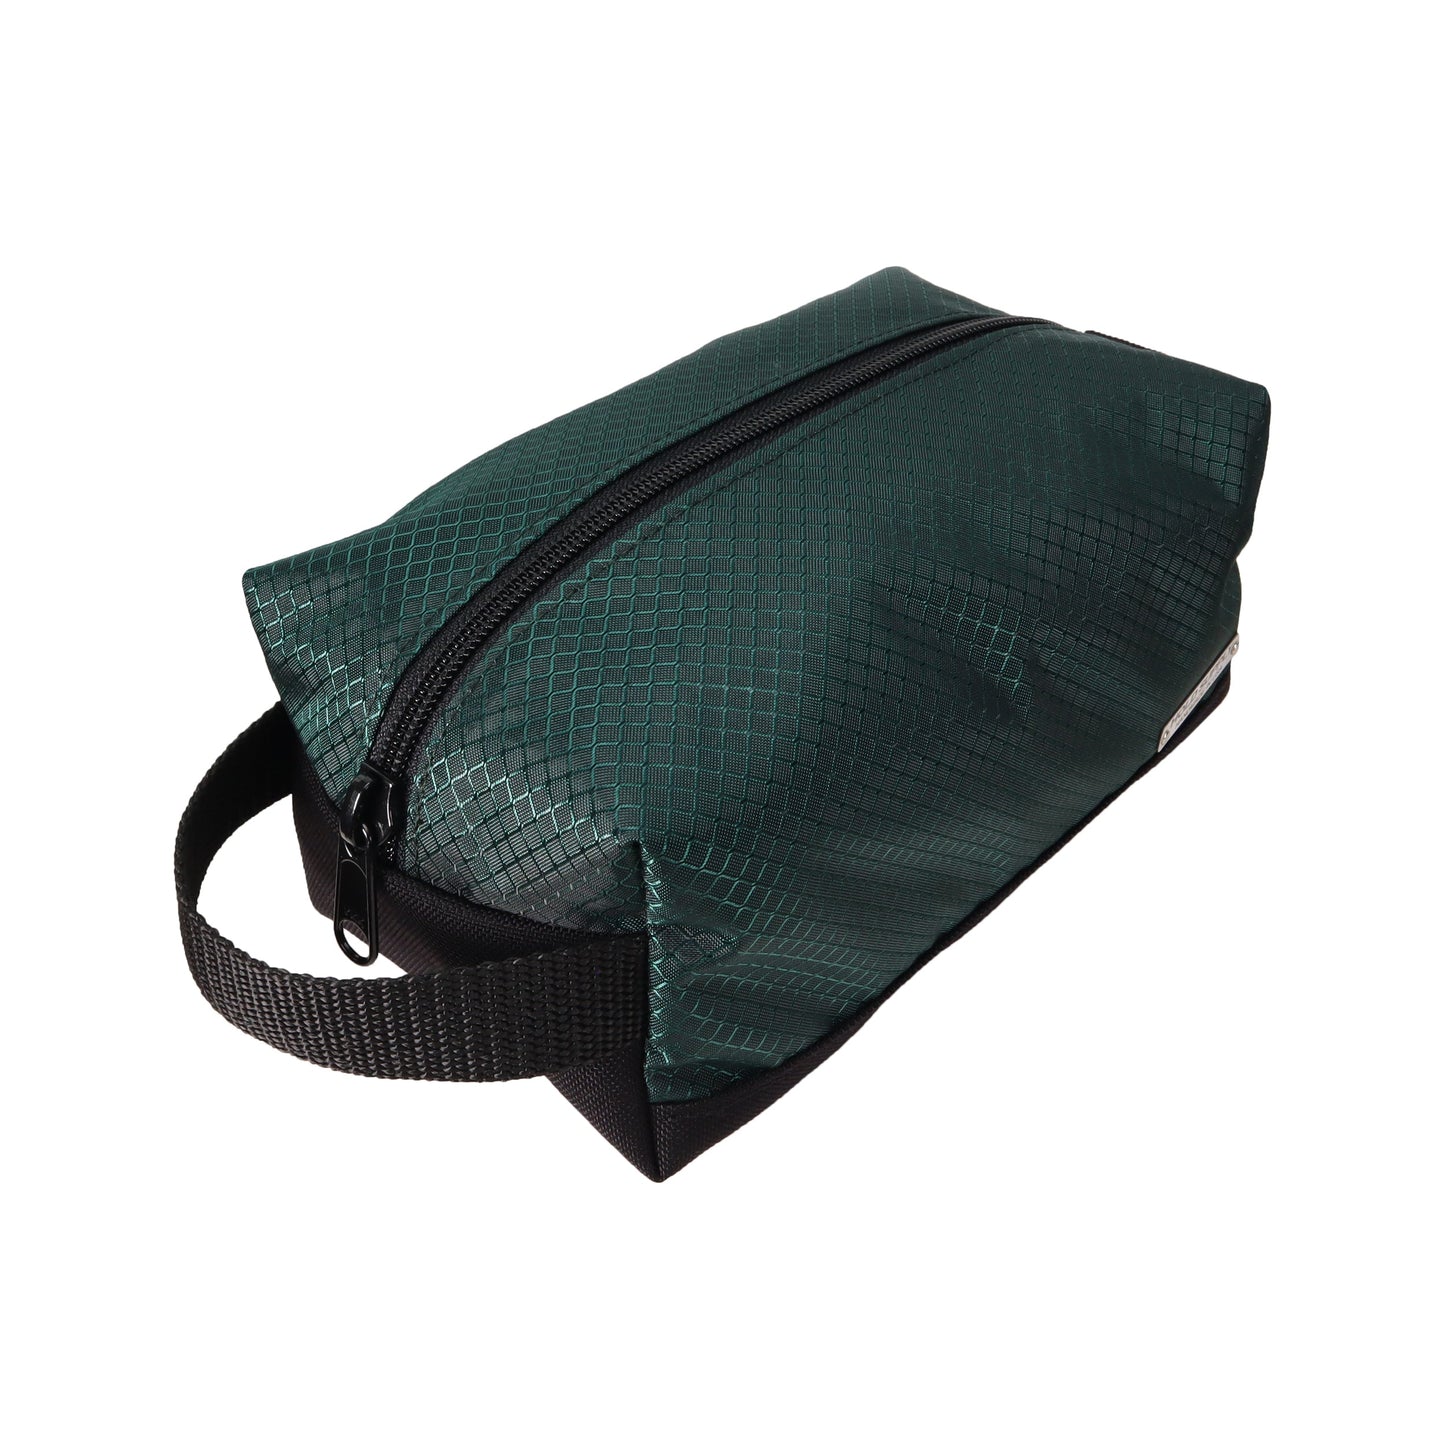 Green and Black Ripstop and Canvas Toiletry Bag